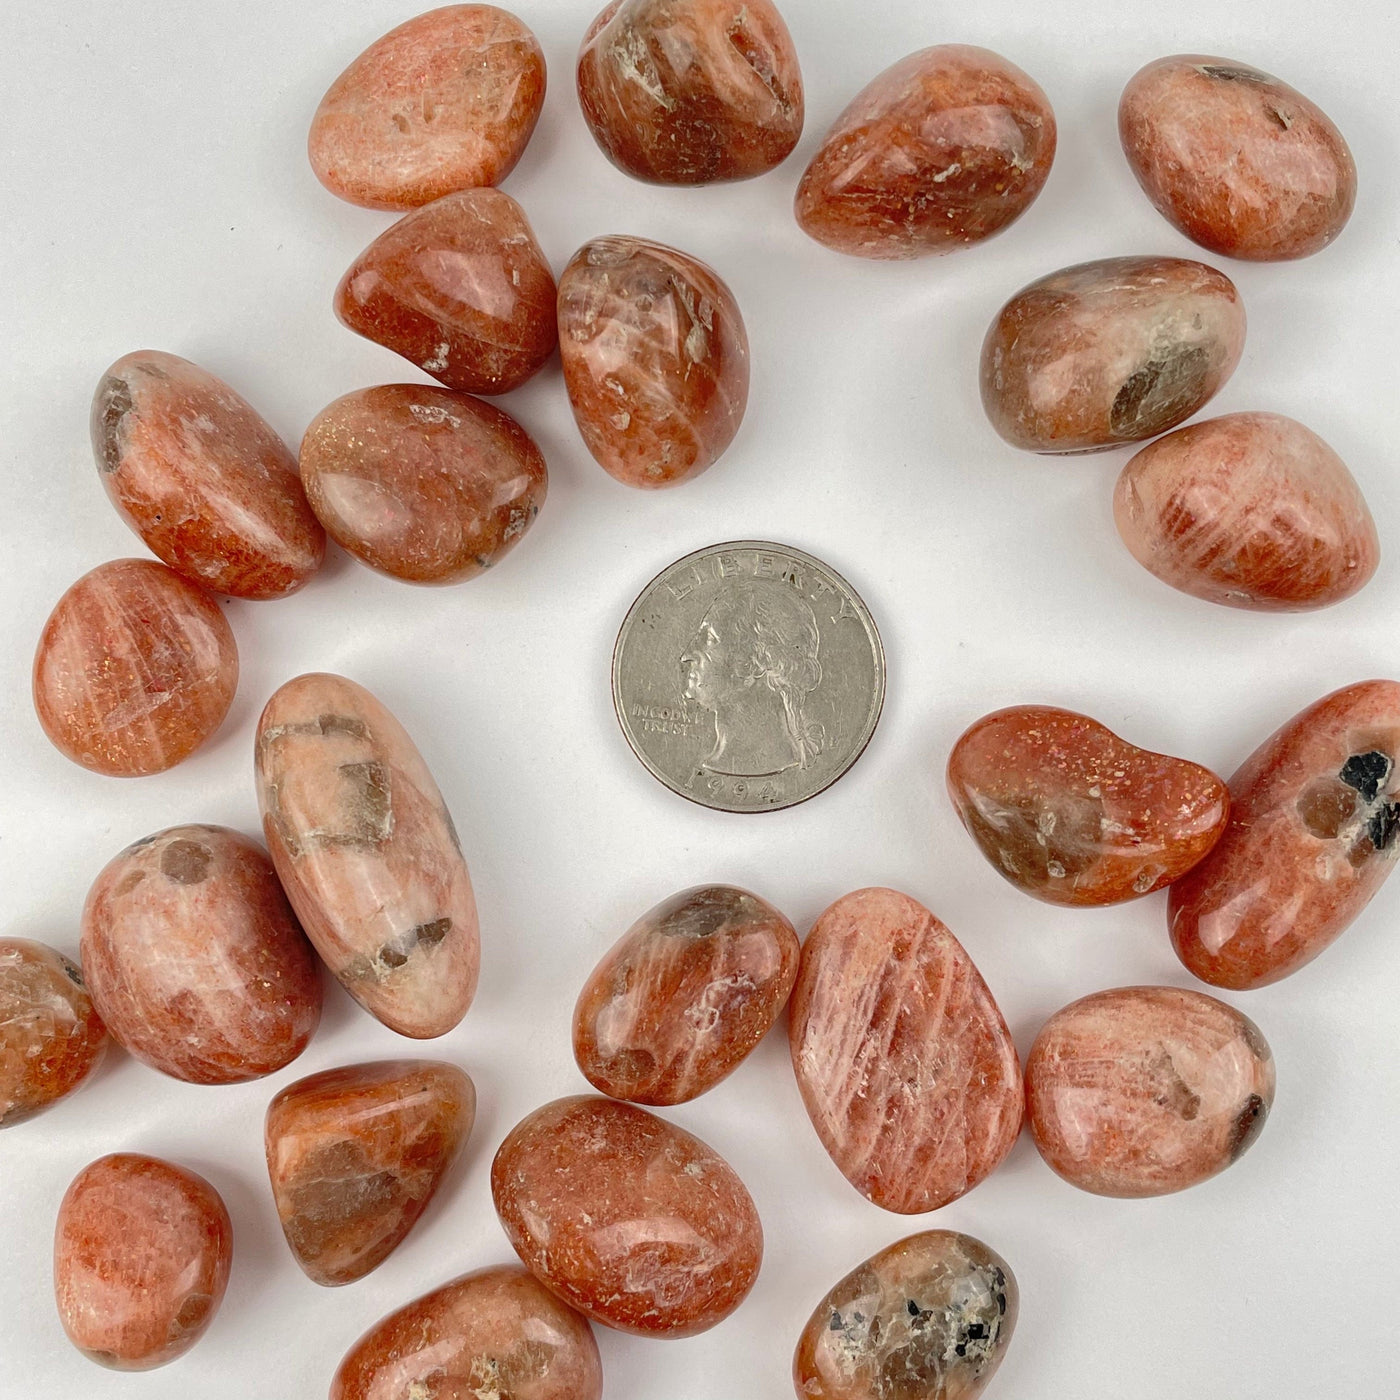 Golden Sunstone Tumbled stones next to a quarter for size reference 